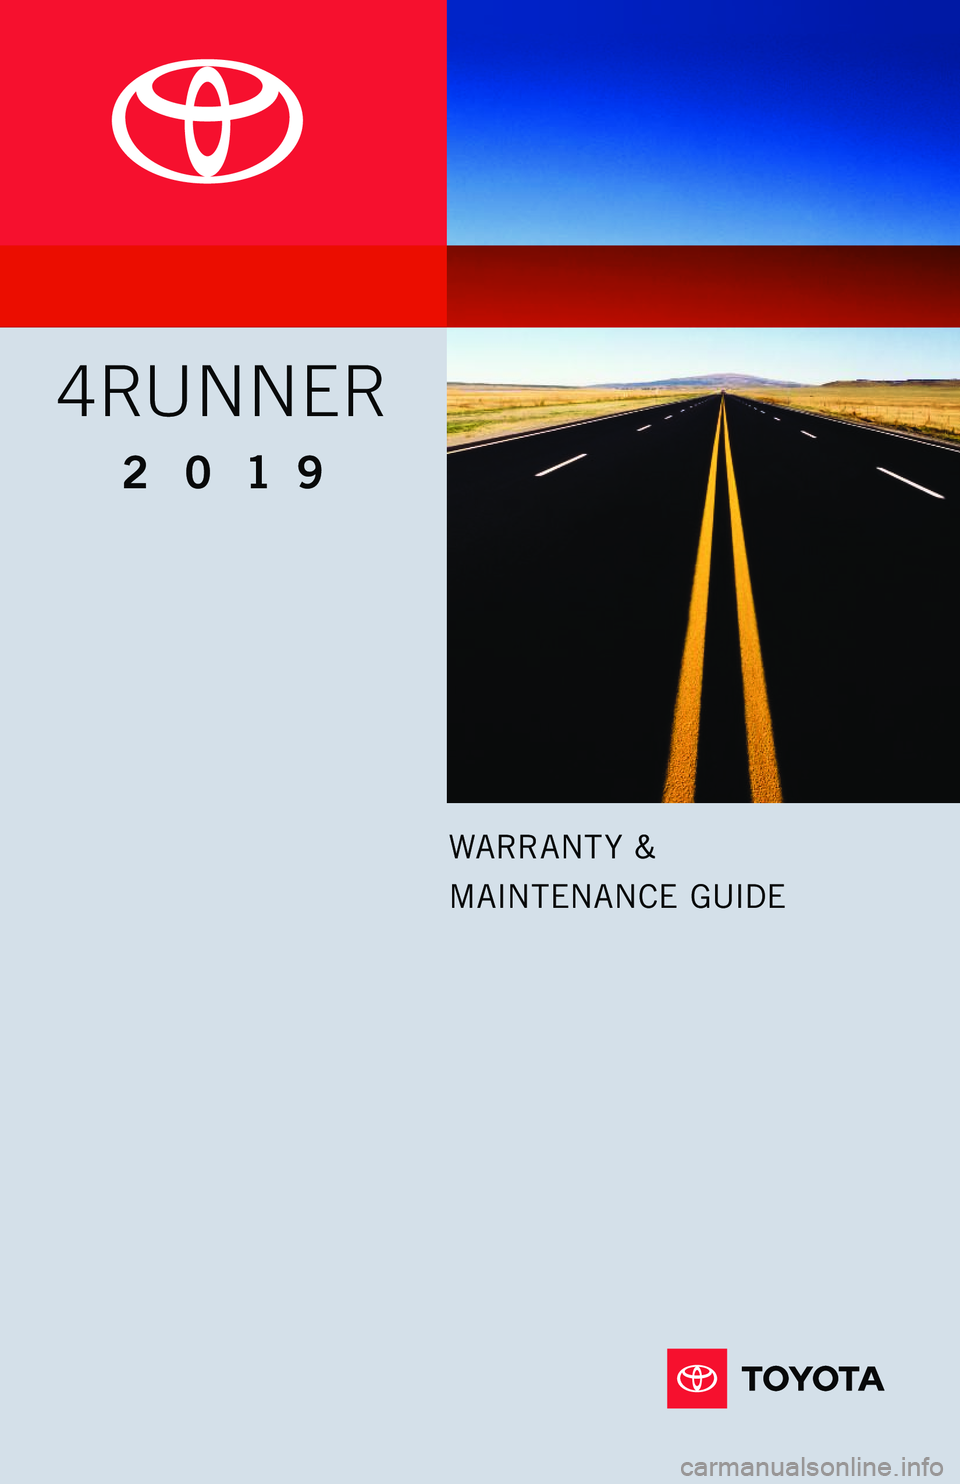 TOYOTA 4RUNNER 2019  Warranties & Maintenance Guides (in English) WARRANT Y & 
MAINTENANCE GUIDE 
4RUNNER
2019        
114136_18-TCS-11409 Toyota WMG MY19 4Runner_cover_F_1.2_TG_R1.indd   27/3/18   11:53 AM   